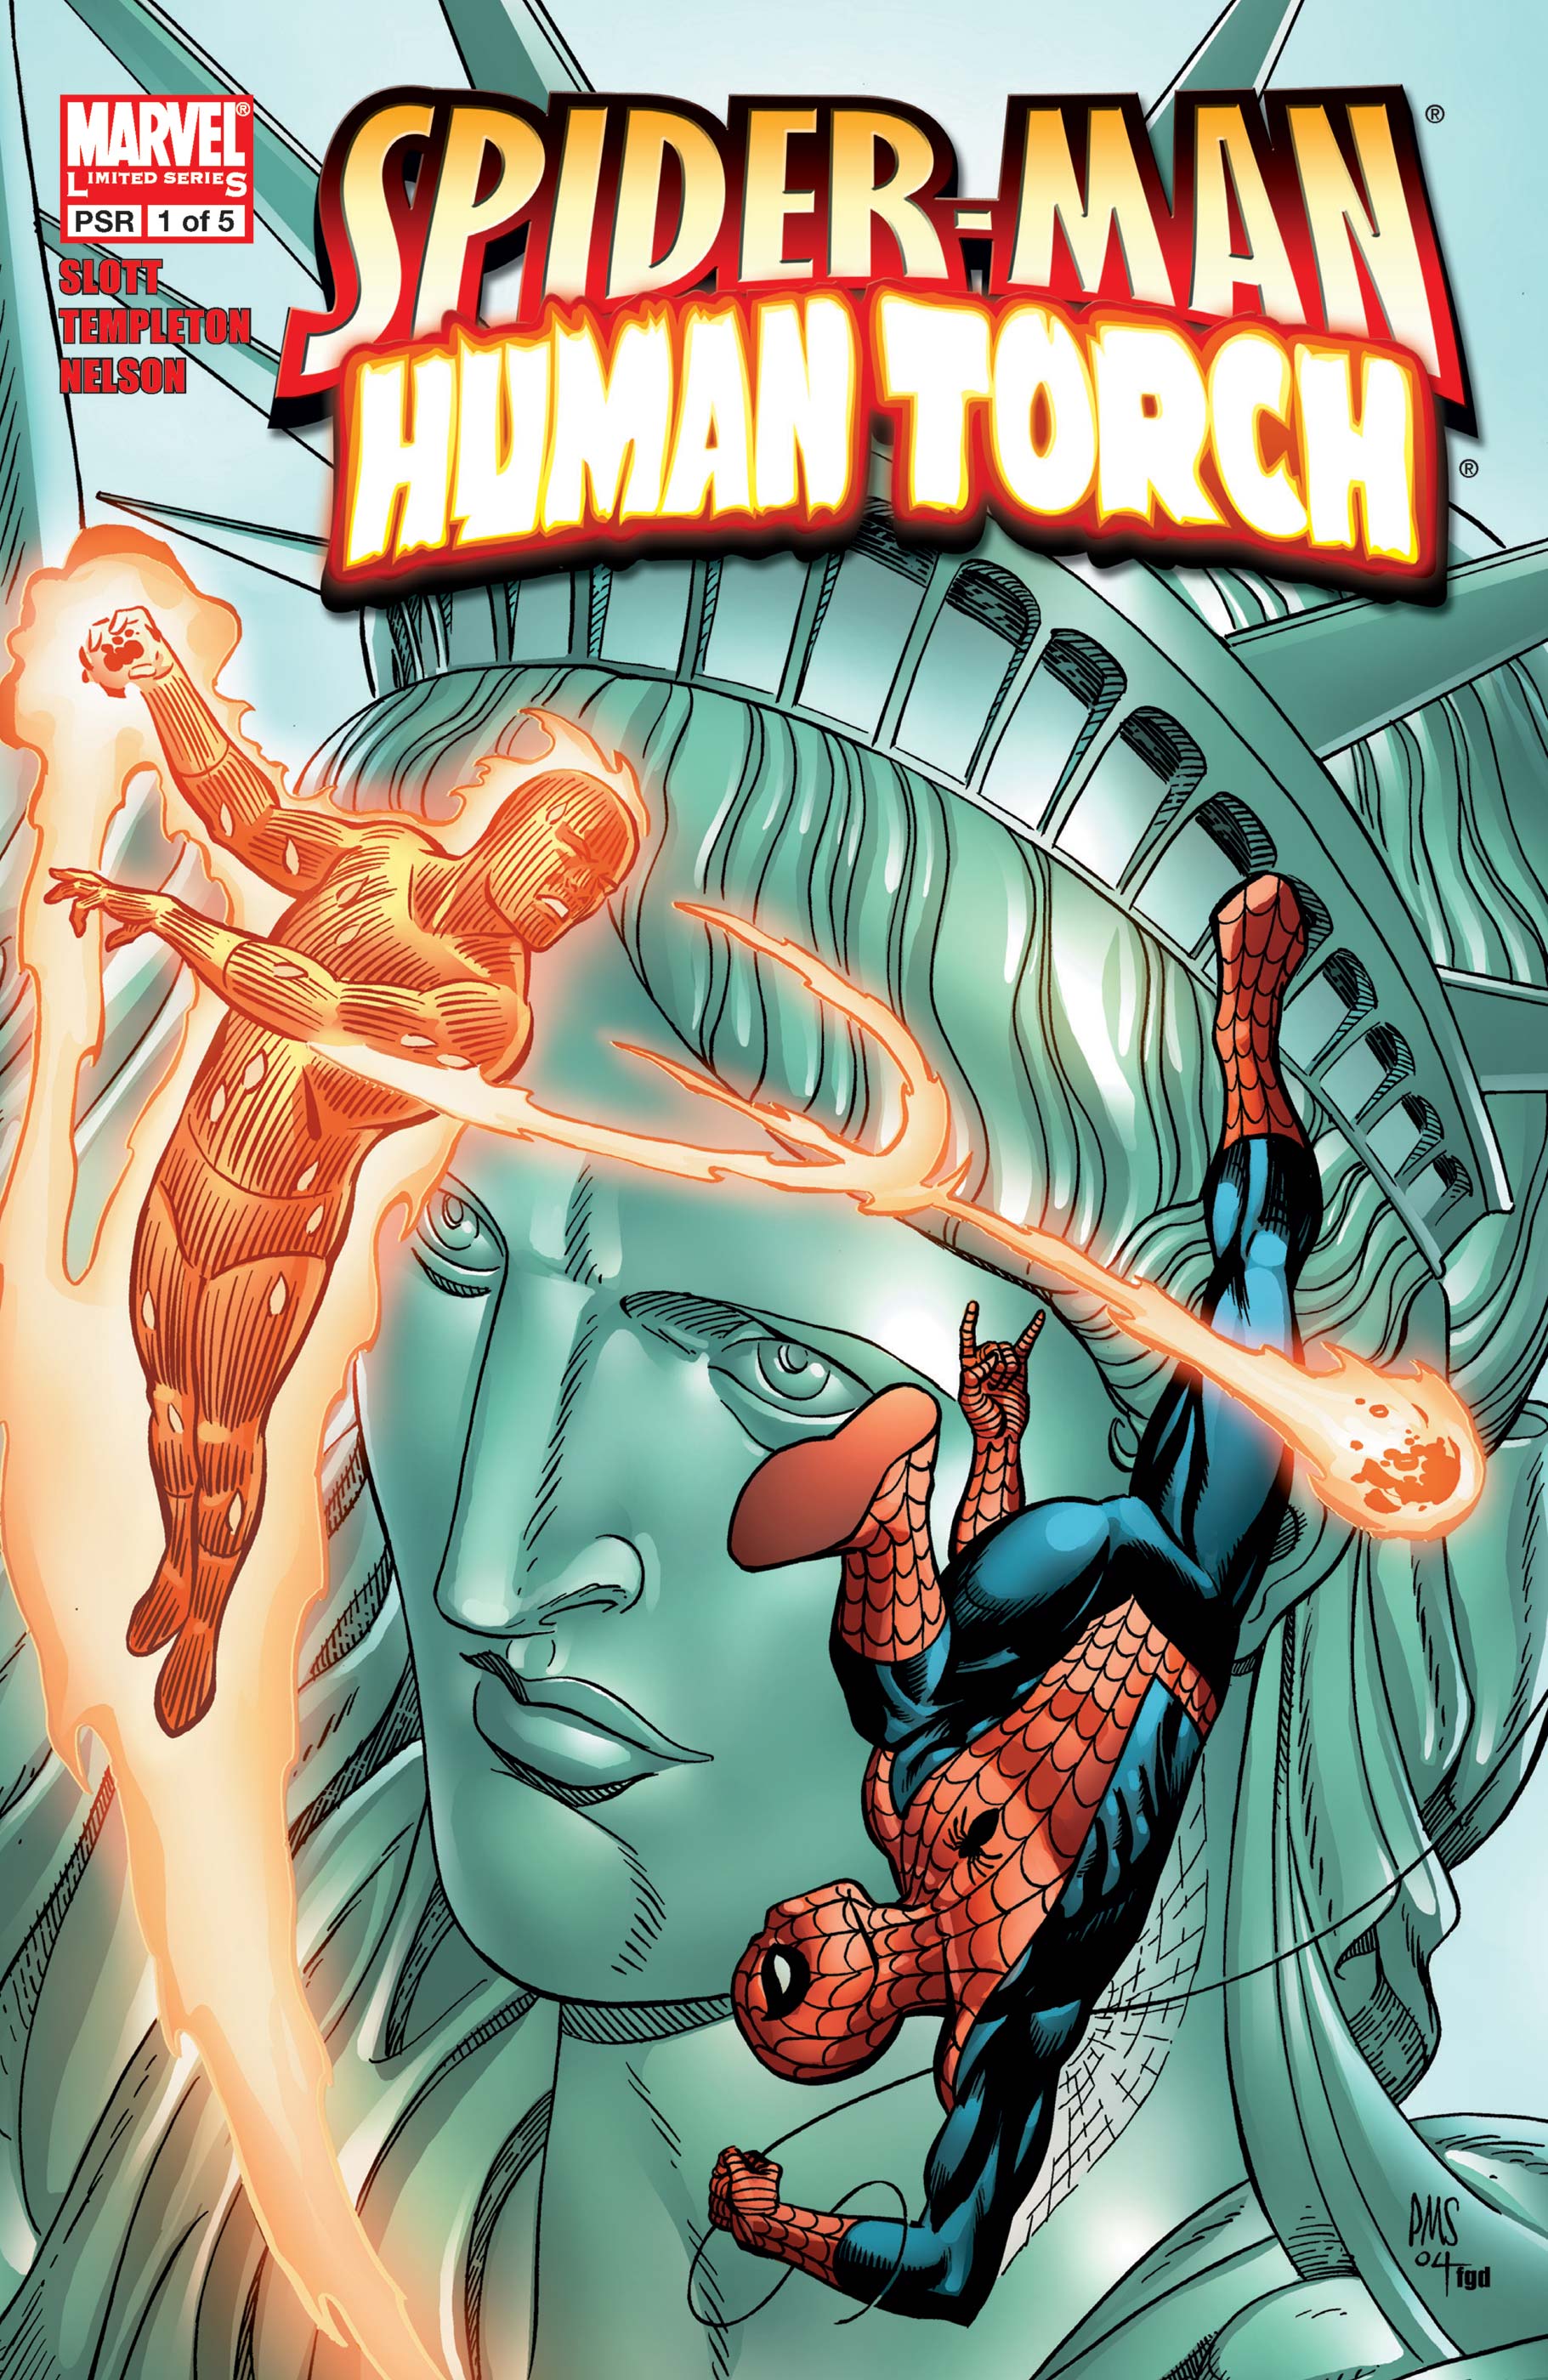 Spider-Man/Human Torch (2005) #1 | Comic Issues | Marvel